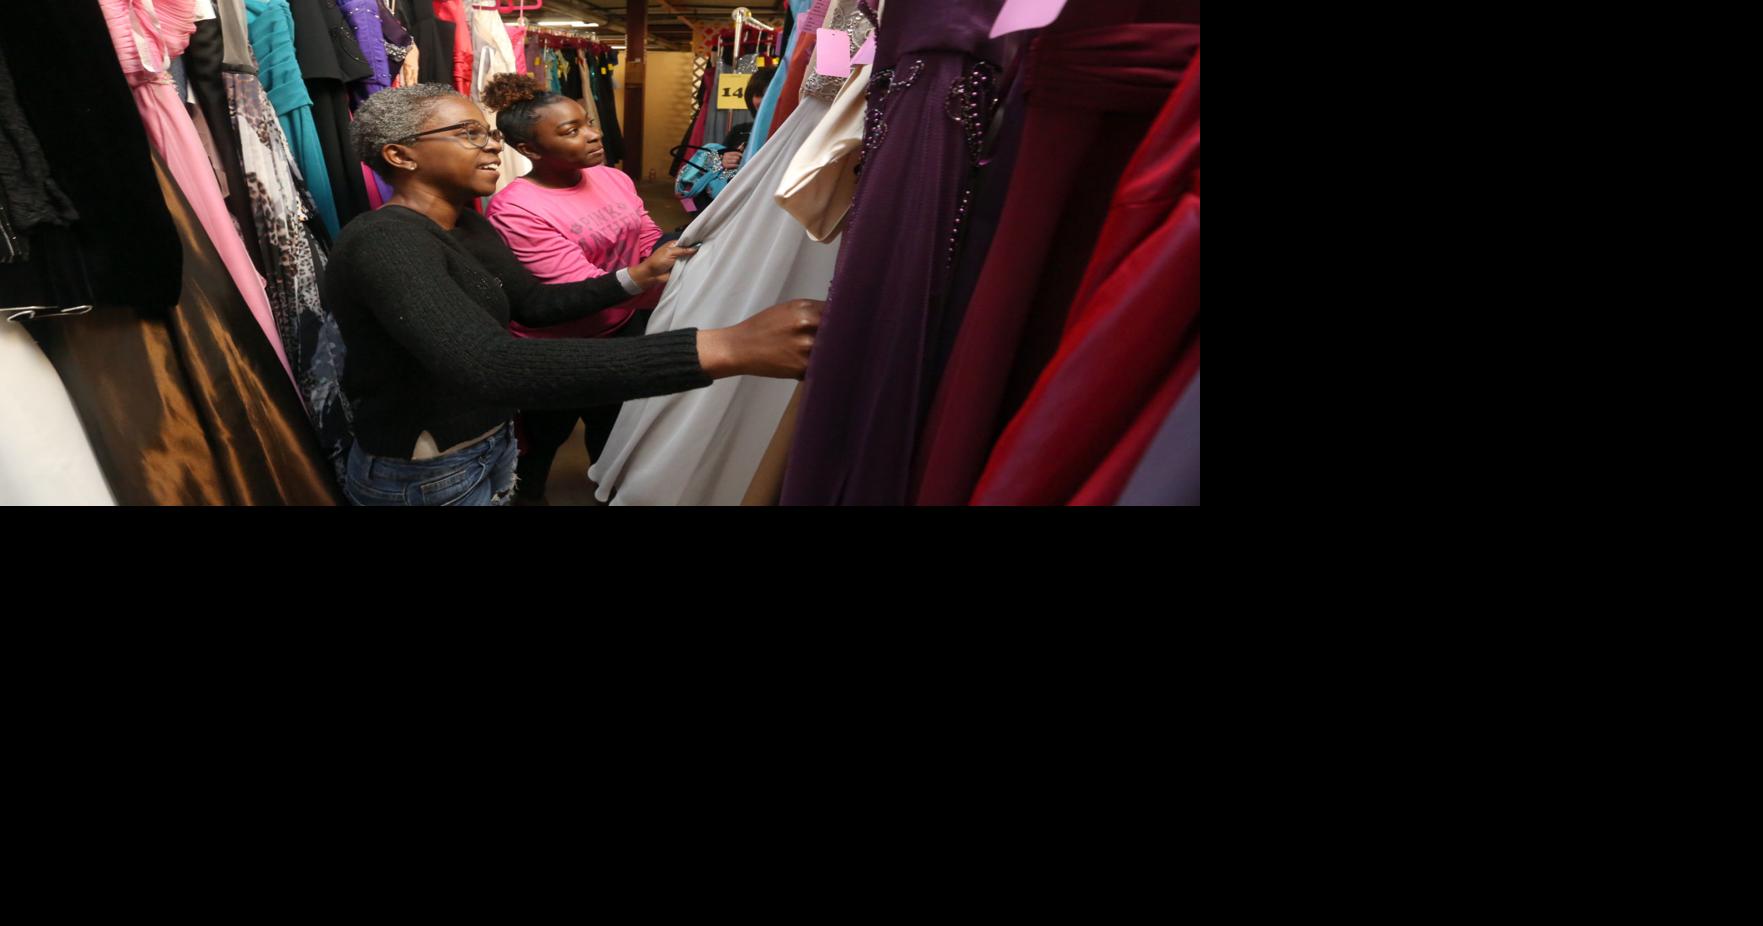 Need a prom dress? You can get one for free thanks to Project Prom ...